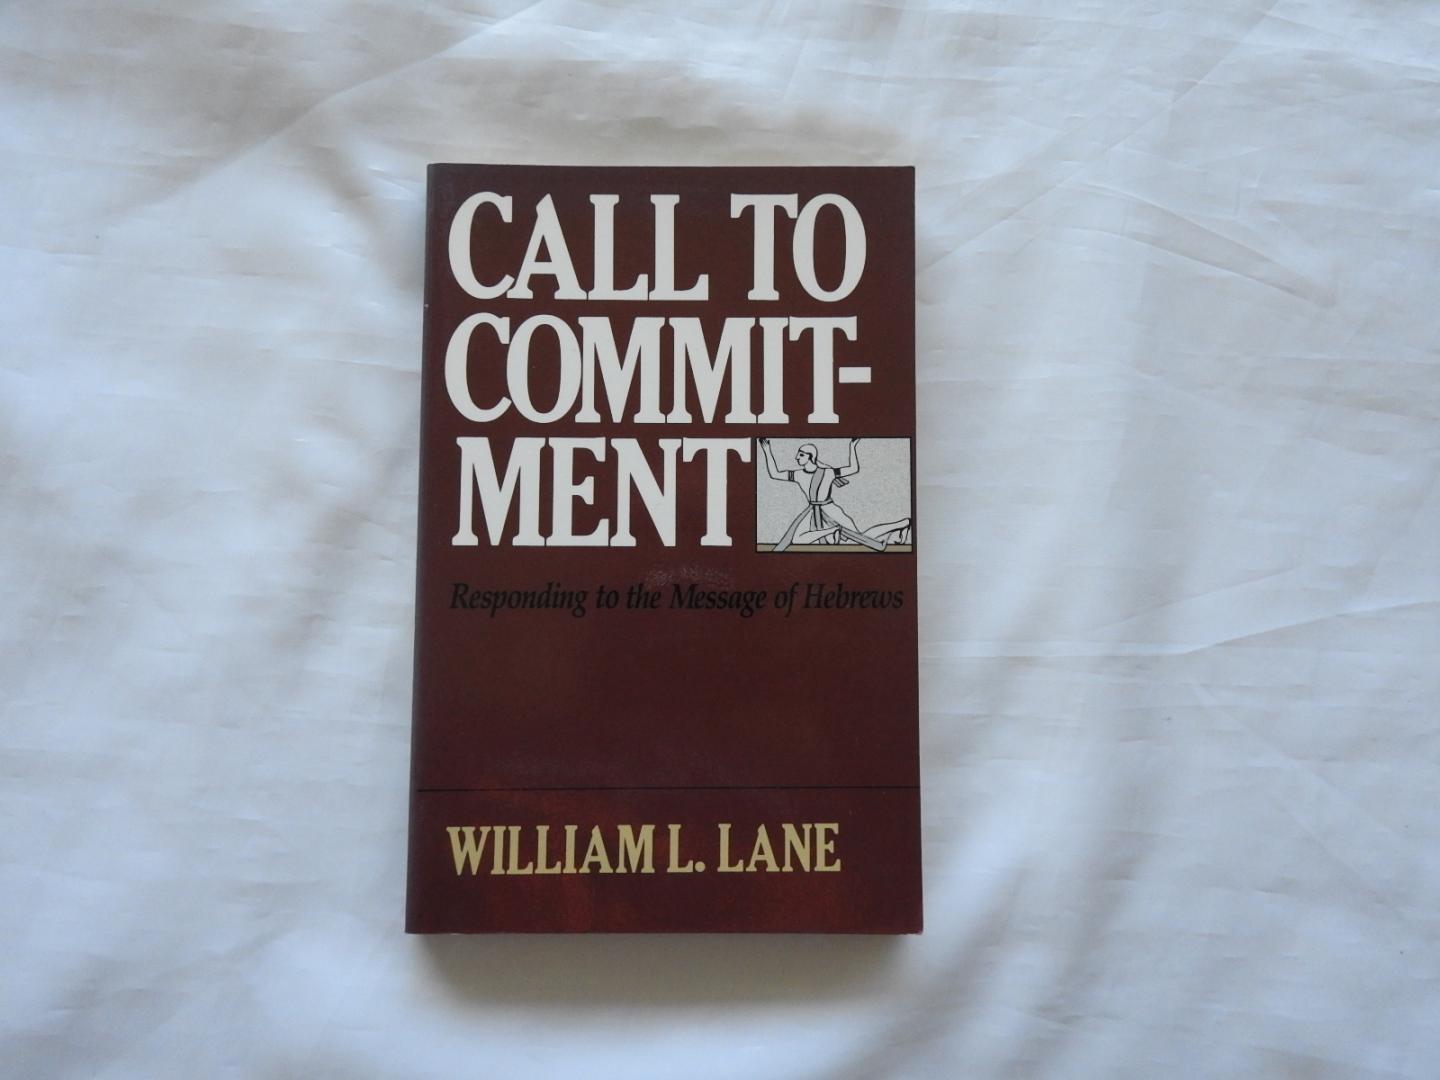 Lane, William L. - Call to commitment : responding to the message of Hebrews